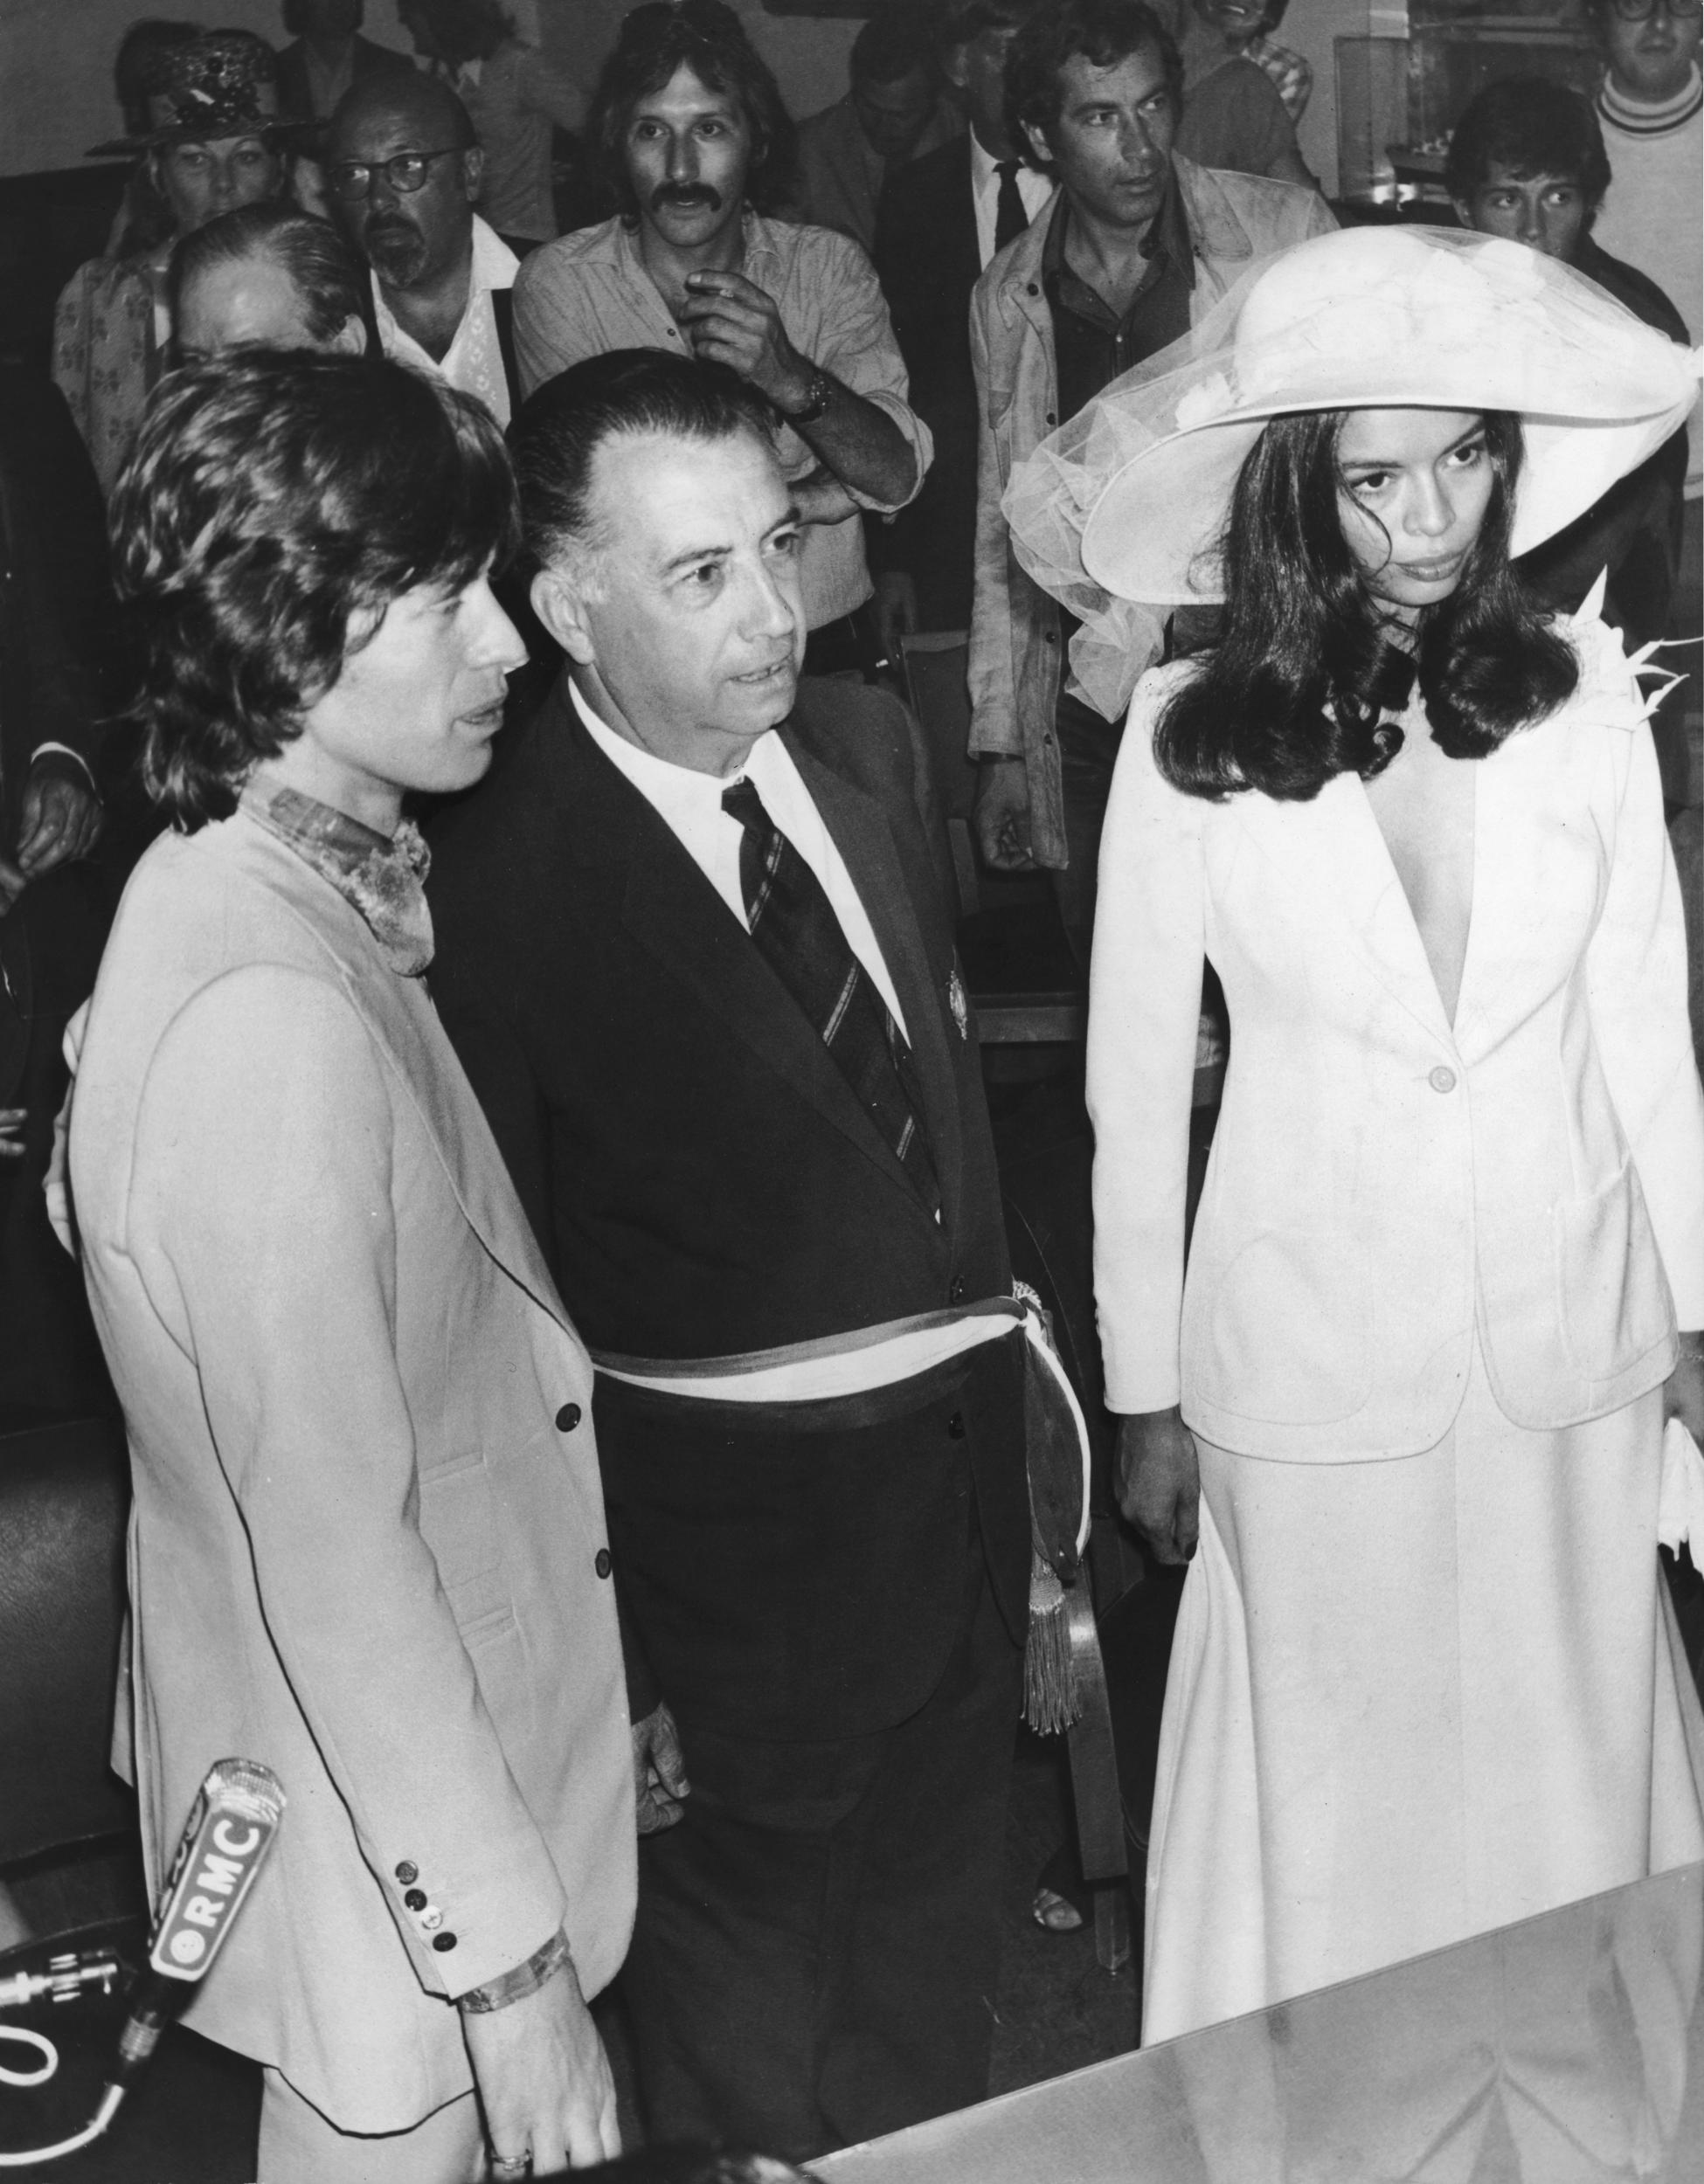 Marius Astezan, the Mayor of Saint-Tropez, stands between Rolling Stones singer Mick Jagger and his new bride Bianca Perez Morena de Macias during their wedding at Saint-Tropez Town Hall, 12th May 1971